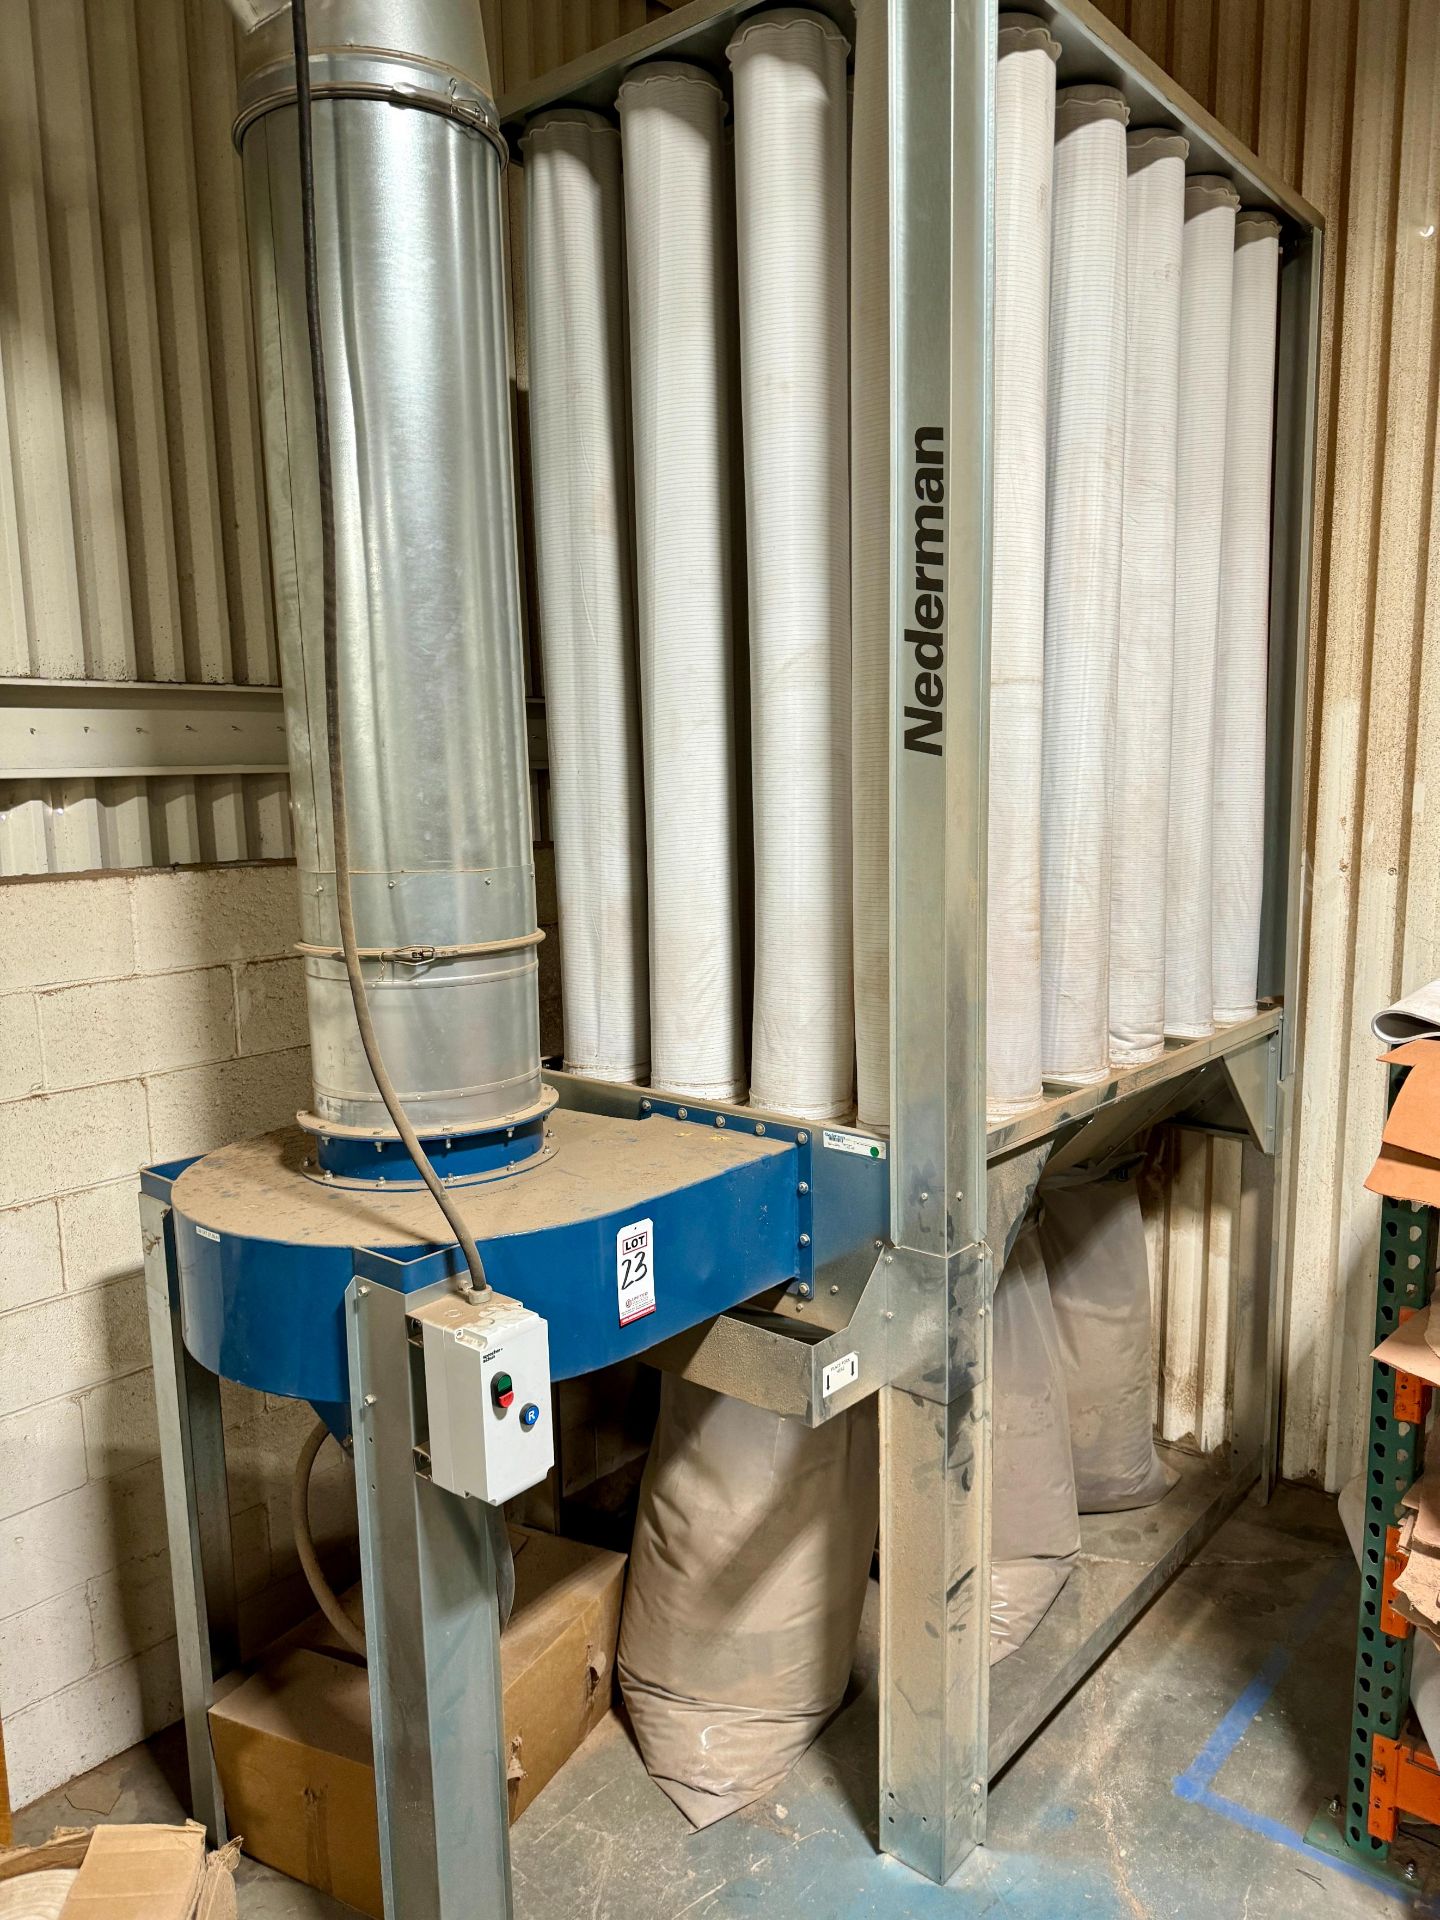 2018 NEDERMAN NFP-S1000 BAG FILTER DUST COLLECTOR, CTR. NO. 18345-00, ITEM NO. 89101009, 10 HP, 3- - Image 7 of 7